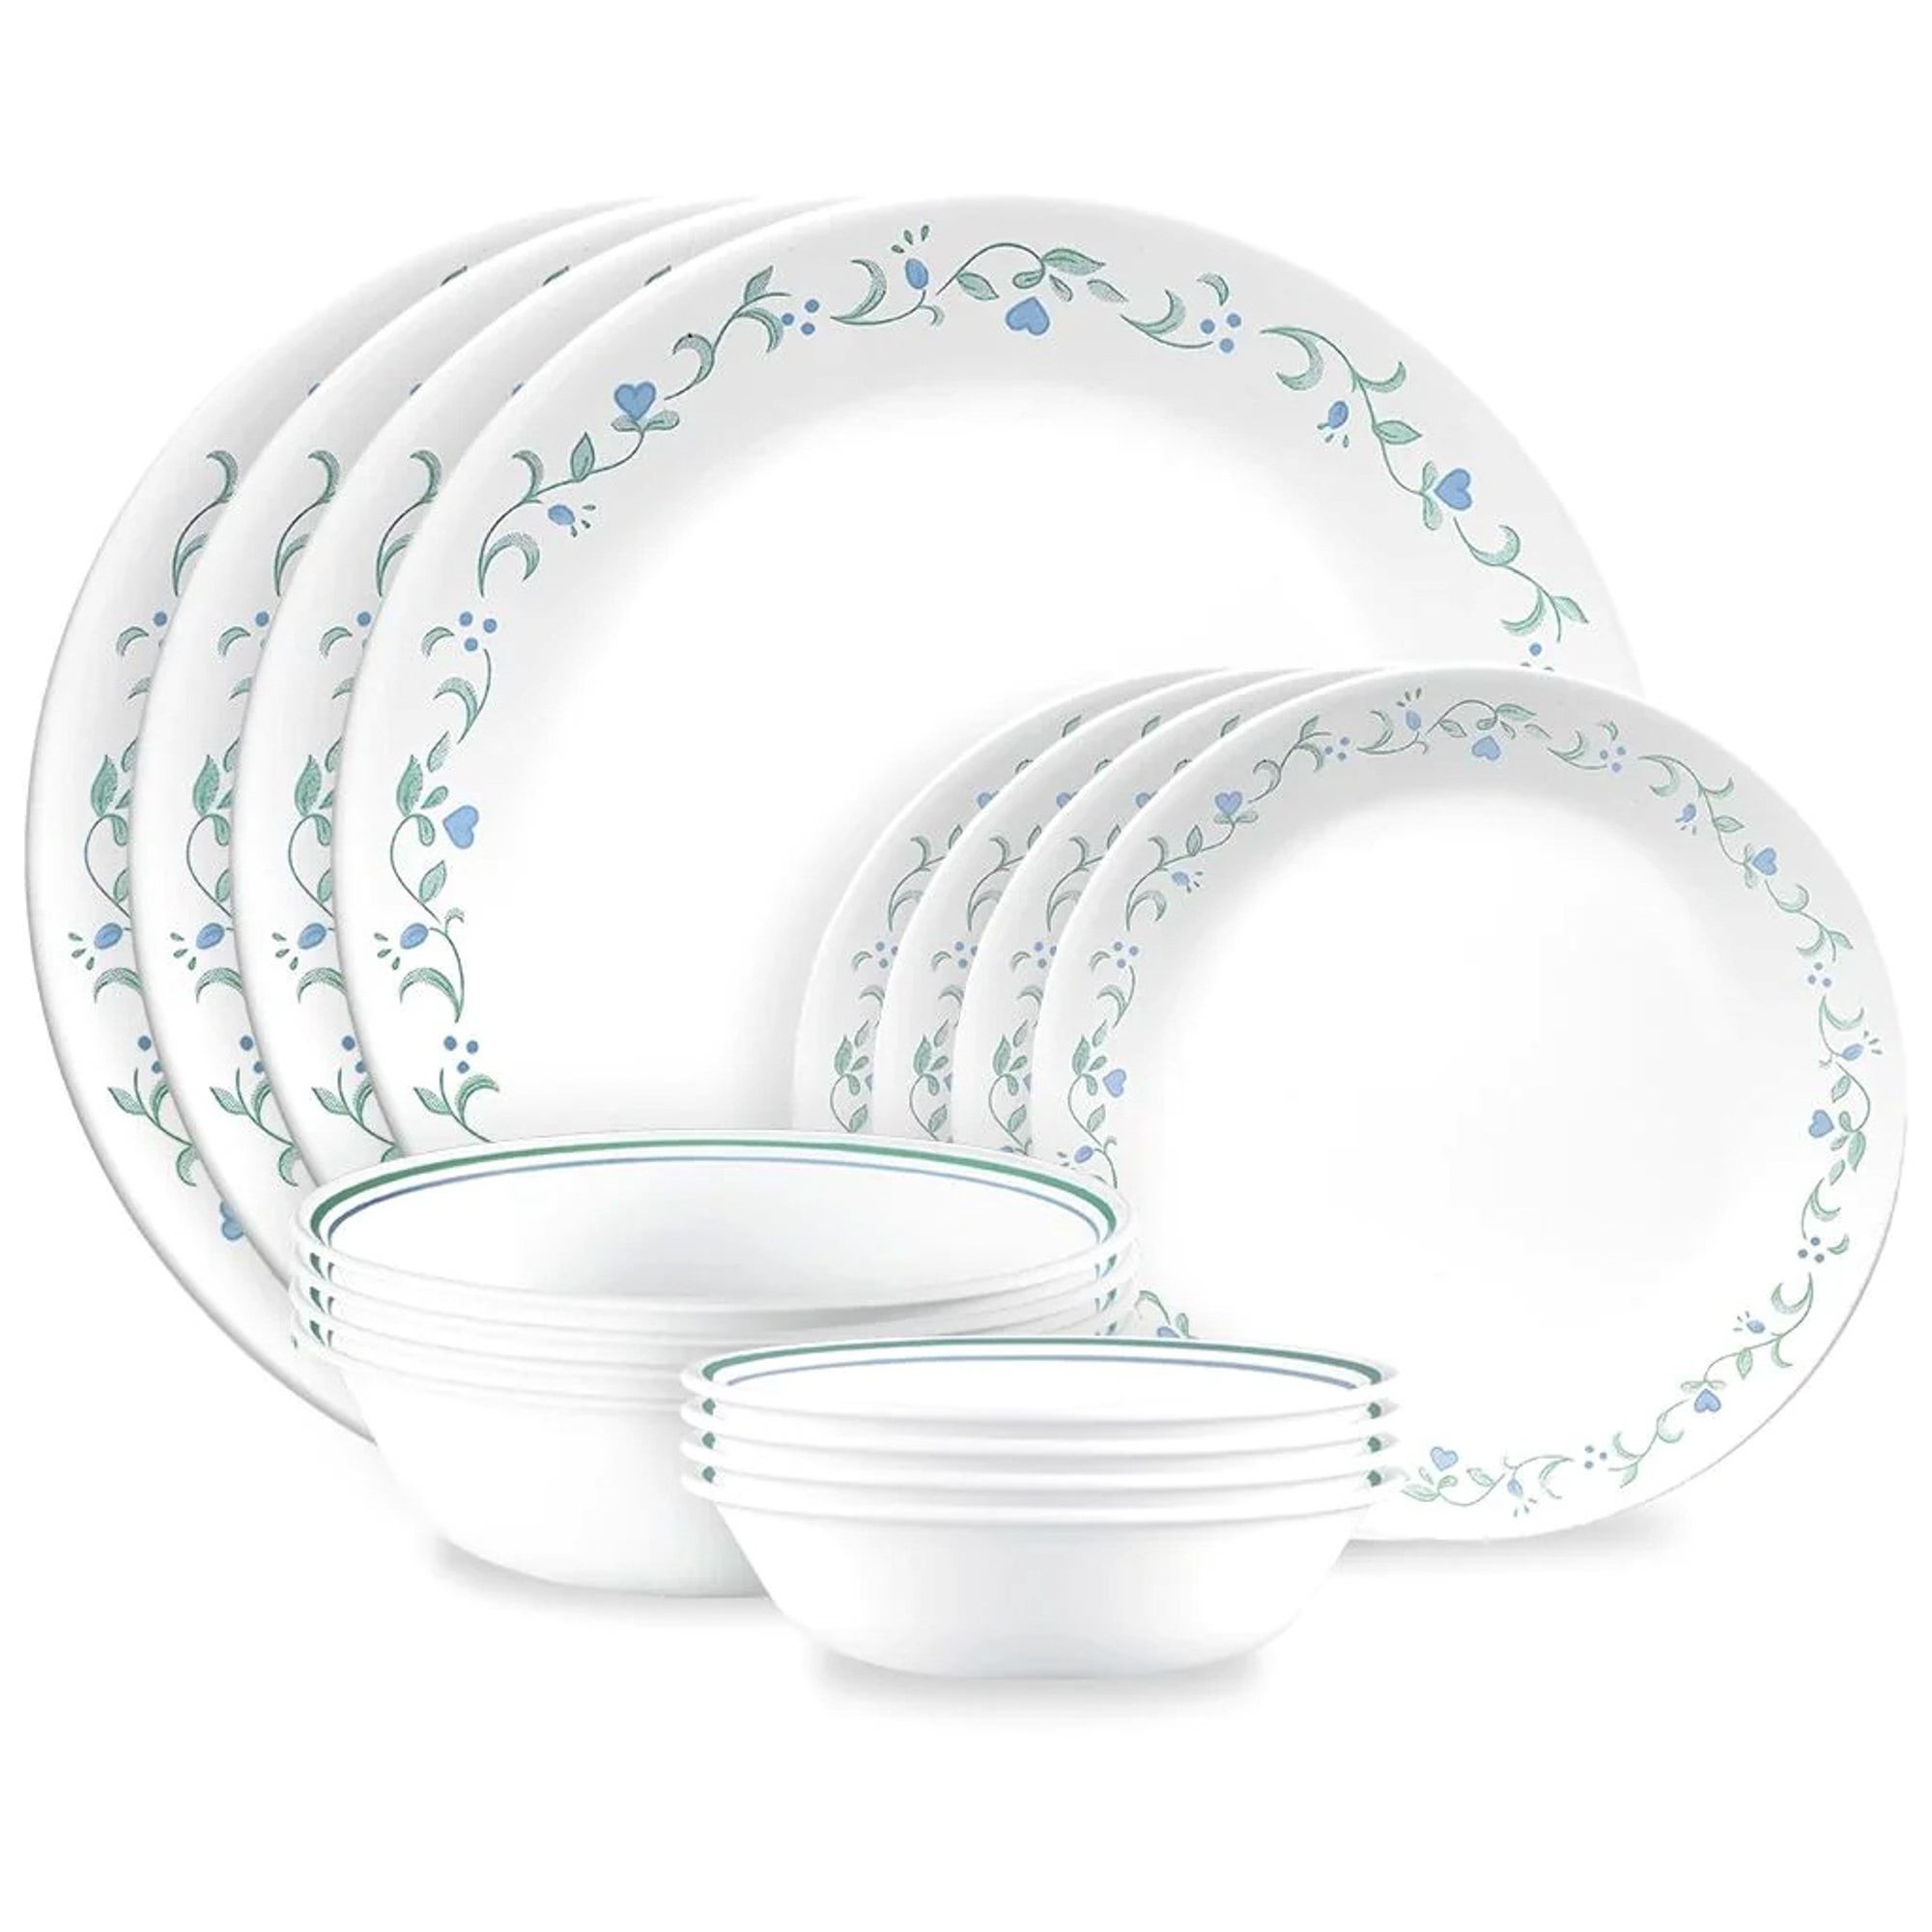 Country Cottage 16pc Dinnerware Set